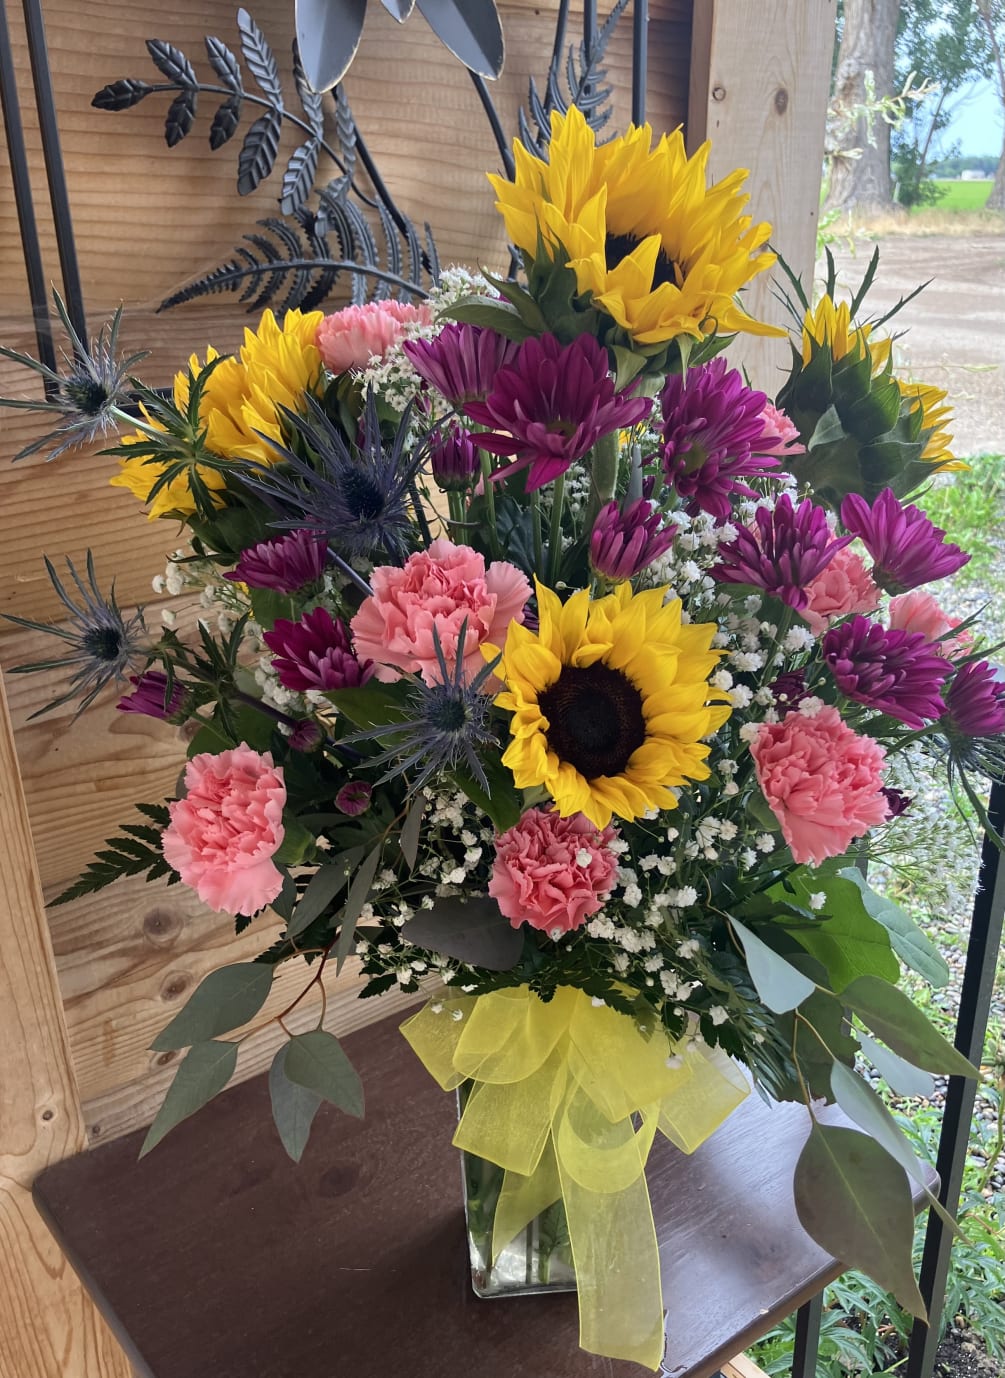 This bouquet with sunflower will brighten up any room! It can be